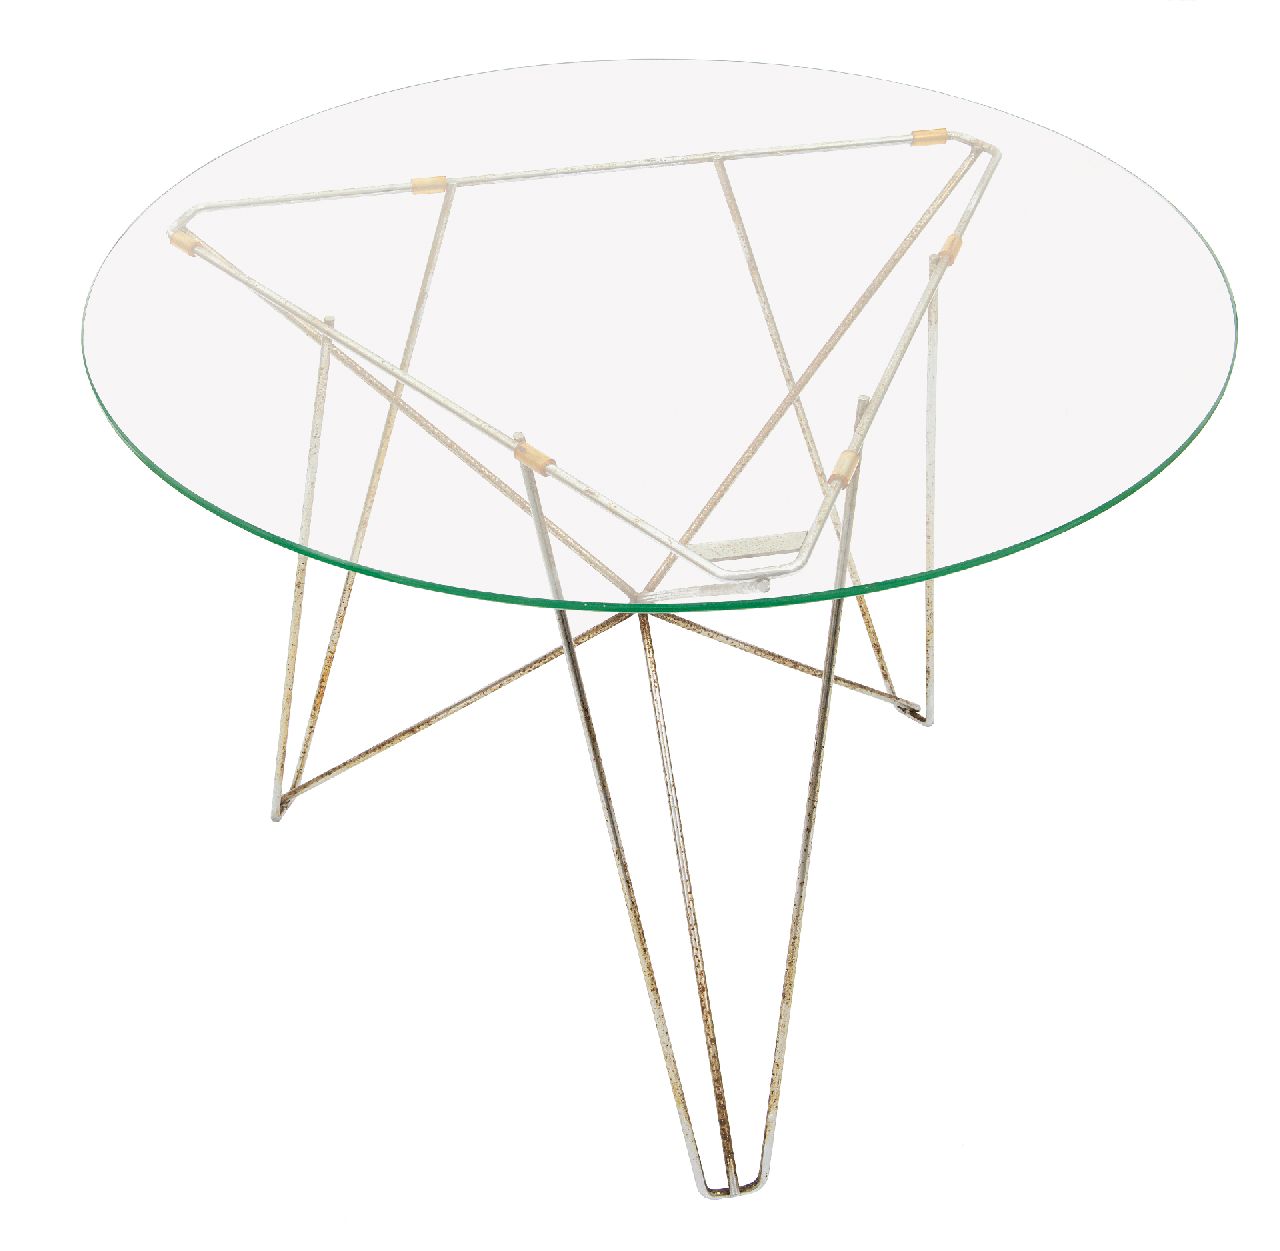 Constant (Constant Anton Nieuwenhuijs)   | Constant (Constant Anton Nieuwenhuijs) |  offered for sale | 'IJhorst' table, 1954, metal and glass 65.0 cm, signed on the frame and dated 1953